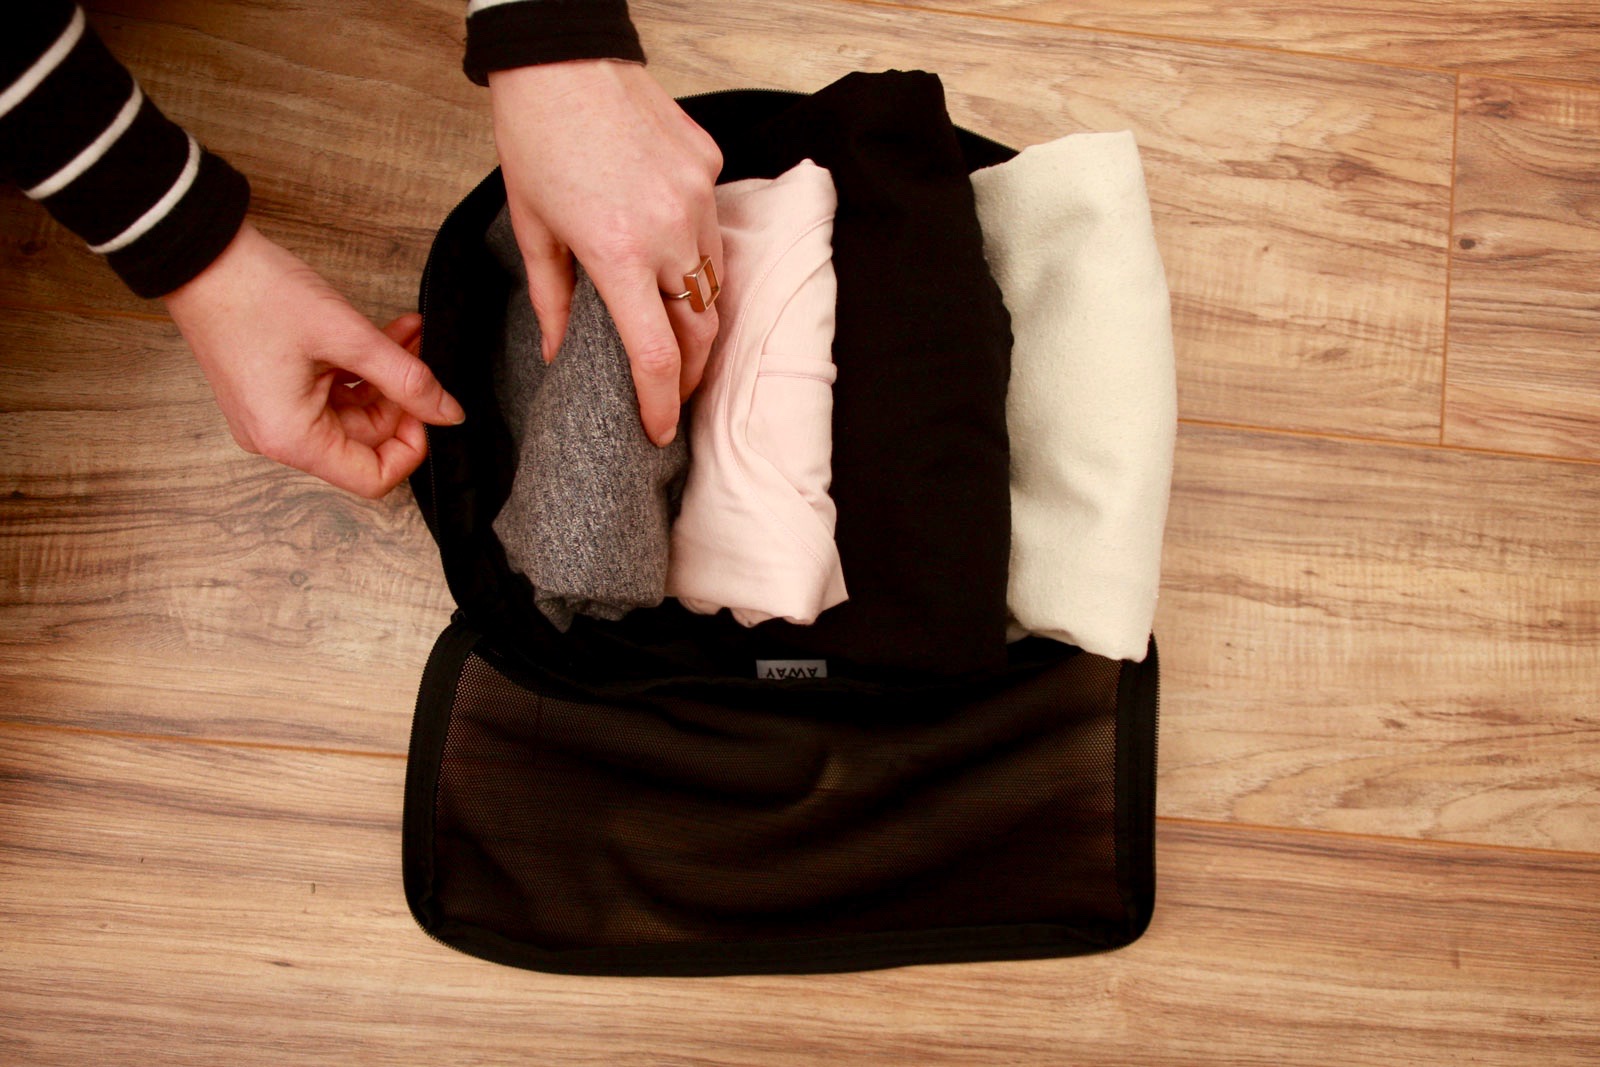 Alyssa files four t-shirts into a packing cube